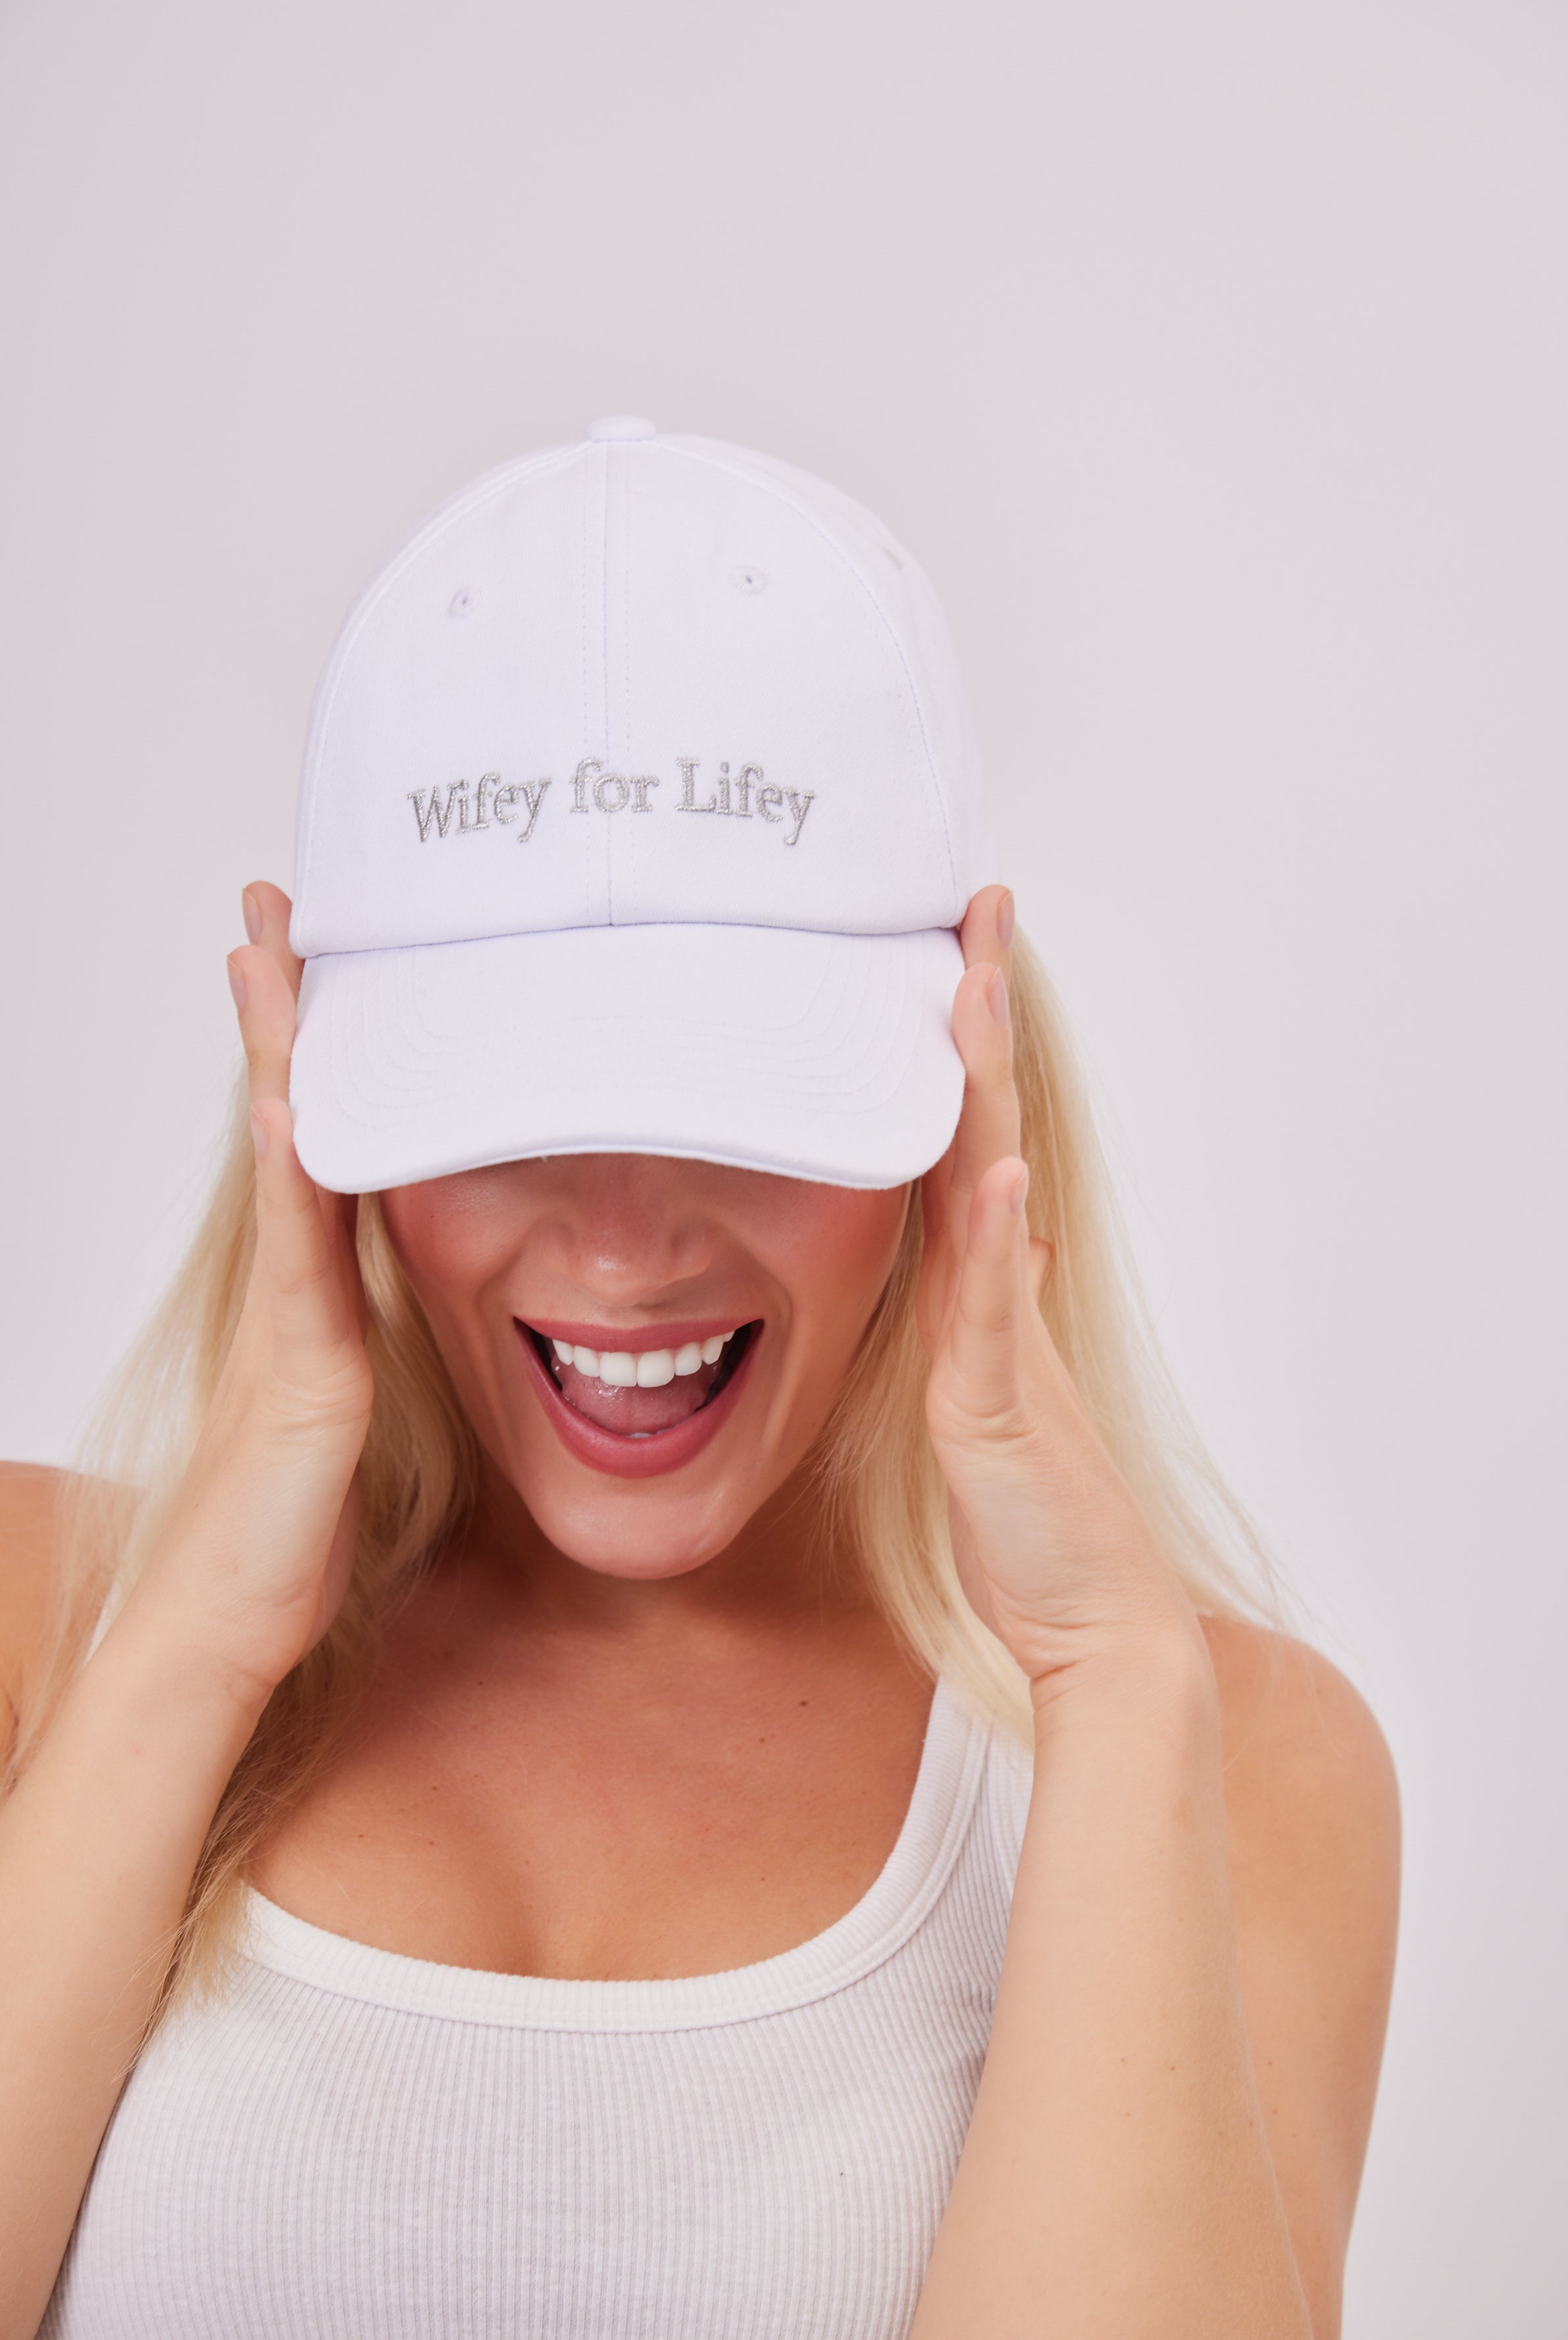 Wifey For Lifey Baseball Cap in White and Silver | bride tribe | bridal accessories | hen do accessories | hen party accessories | bachelorette accessories | hen do hat | hen party hat | bride hat | bridal hat | embroidered bride cap | wedding accessories | bride accessories | wedding party | wedding party accessories